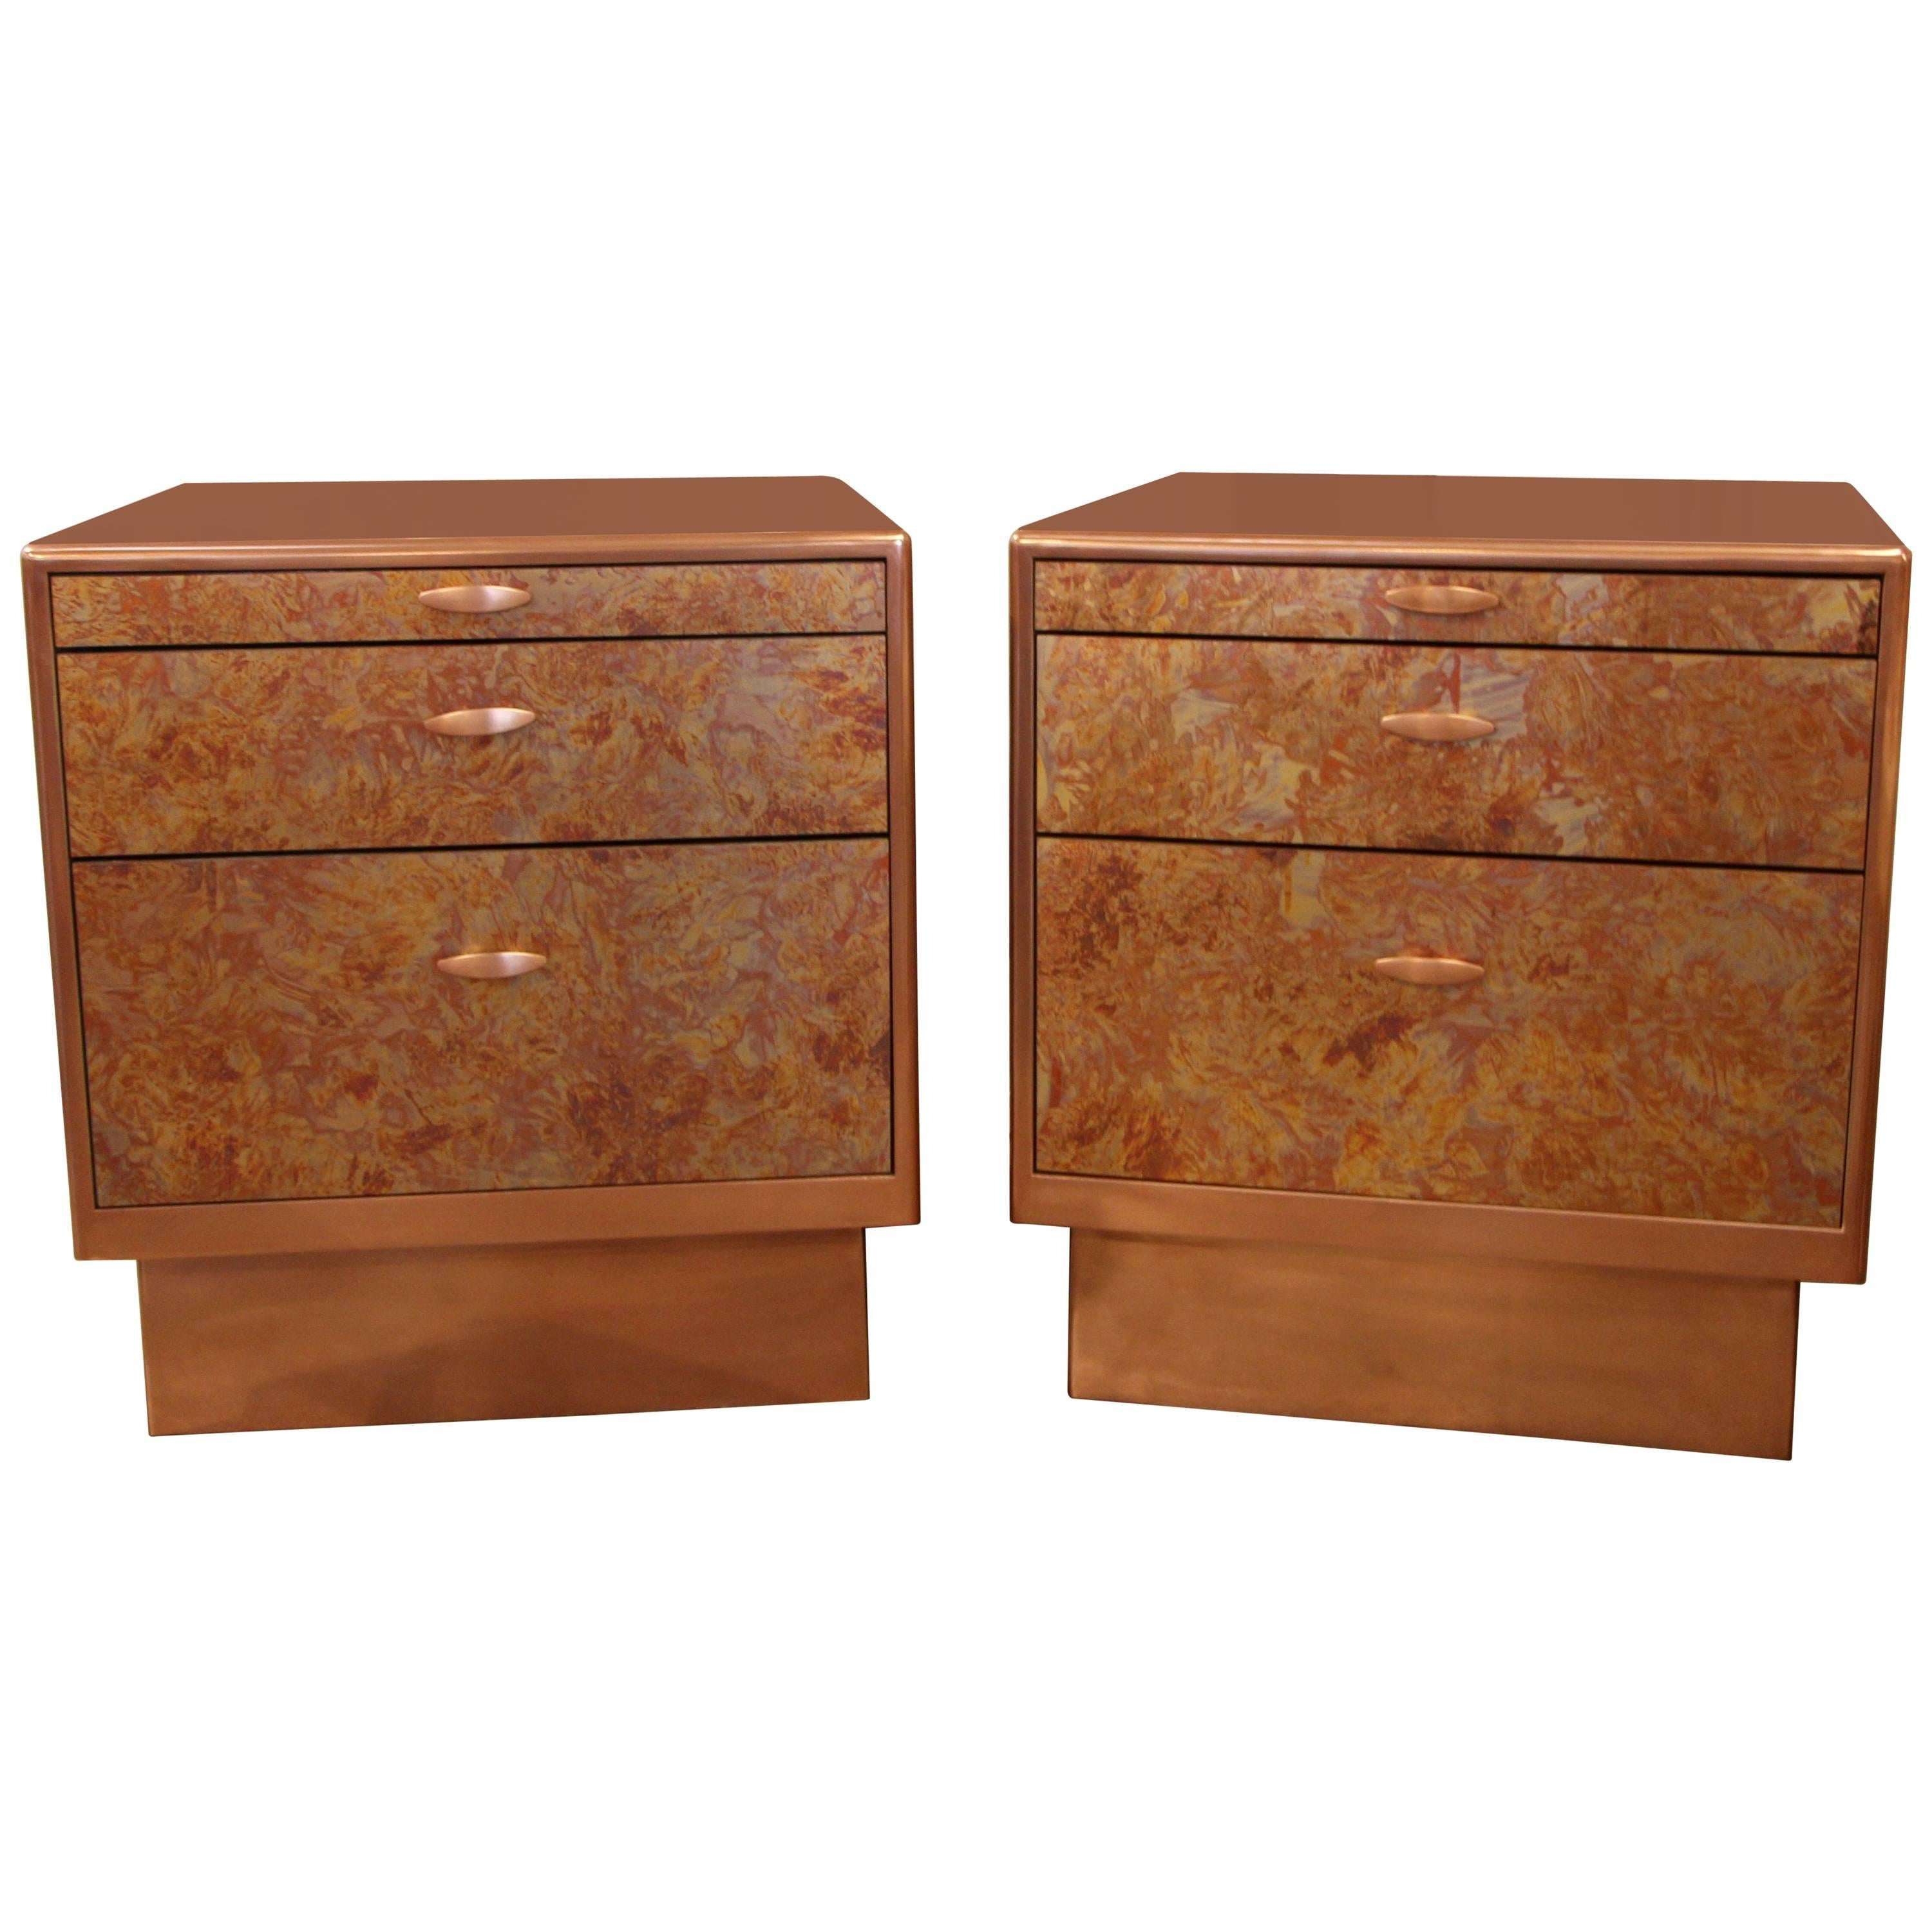 Patinated Copper Sheet Clad Nightstands or Chests